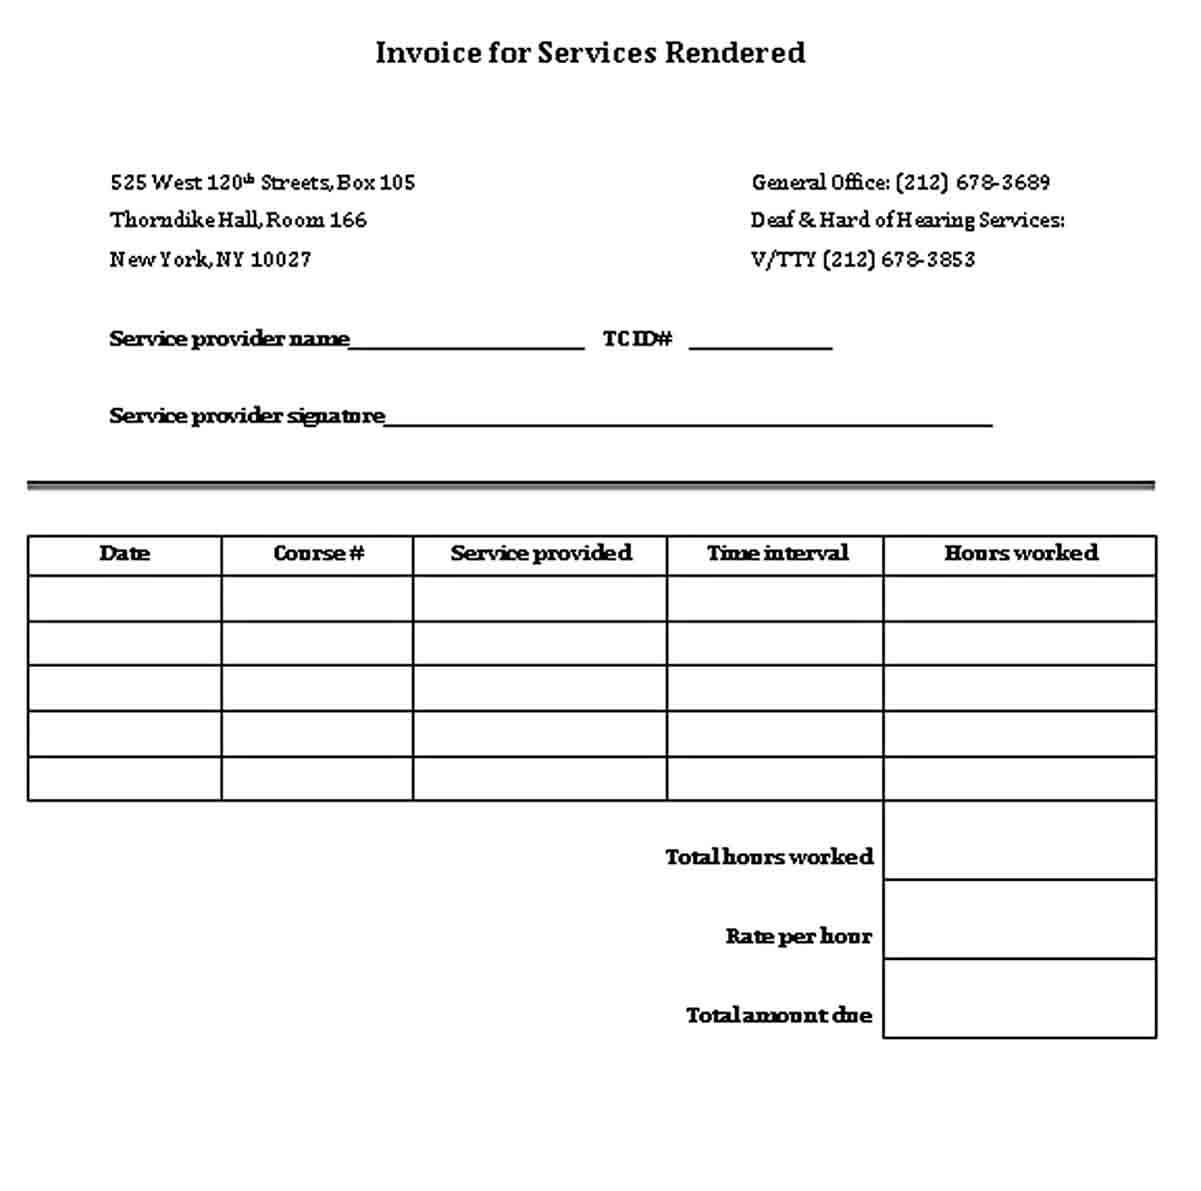 Receipt for Services Rendered Word Free Download1